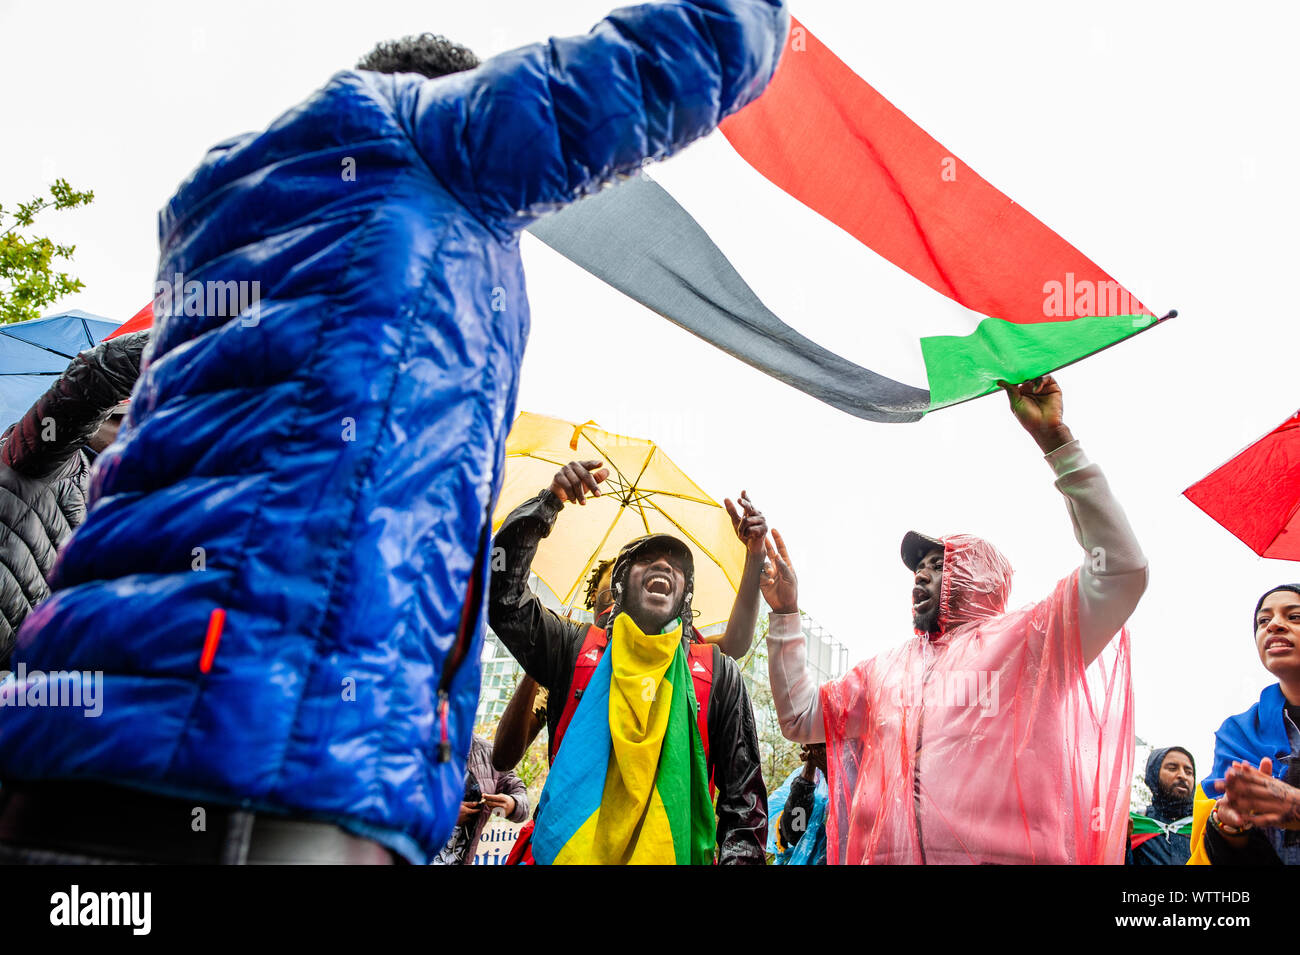 A group of Sudanese people dance below a Sudanese flag during the march.From September 6th to 11th, an international Sudanese march took place starting in London and ending in The Hague after stopping in France and Belgium. On September 11th, the march arrived in front of the International Criminal Court building, situated in The Hague. The march was held in solidarity with the Sudanese revolution and calls for the prosecution of military criminals in Sudan. The march was organized by the Sudanese Initiative Europe. Stock Photo